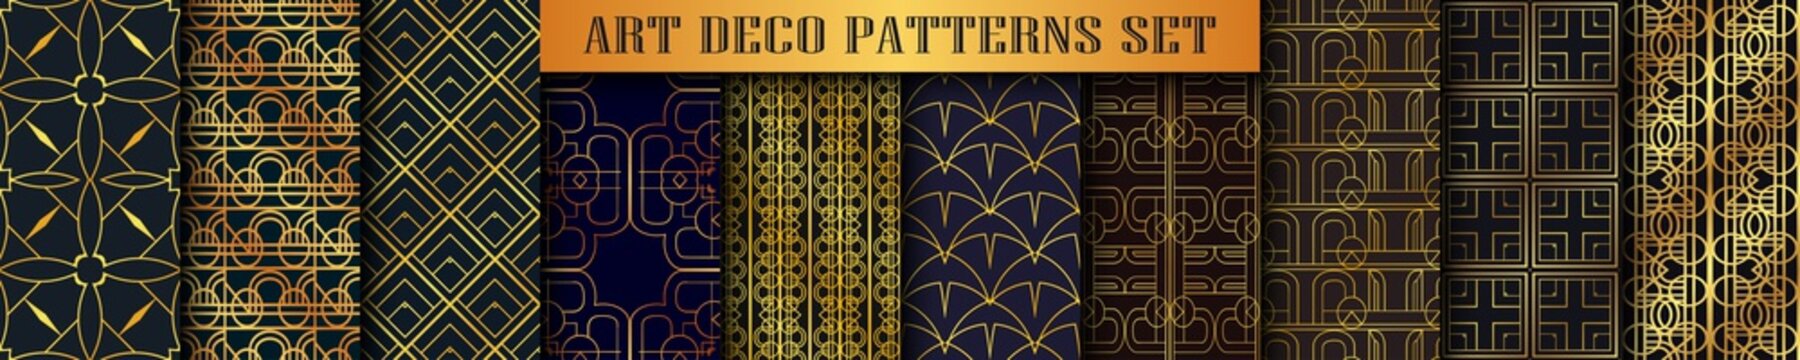 Vintage ornamental art deco retro seamless backgrounds and textures set . Vector illustration in this collection can be used for wrapping paper, wallpapers, tiling, flooring, fabric, textile